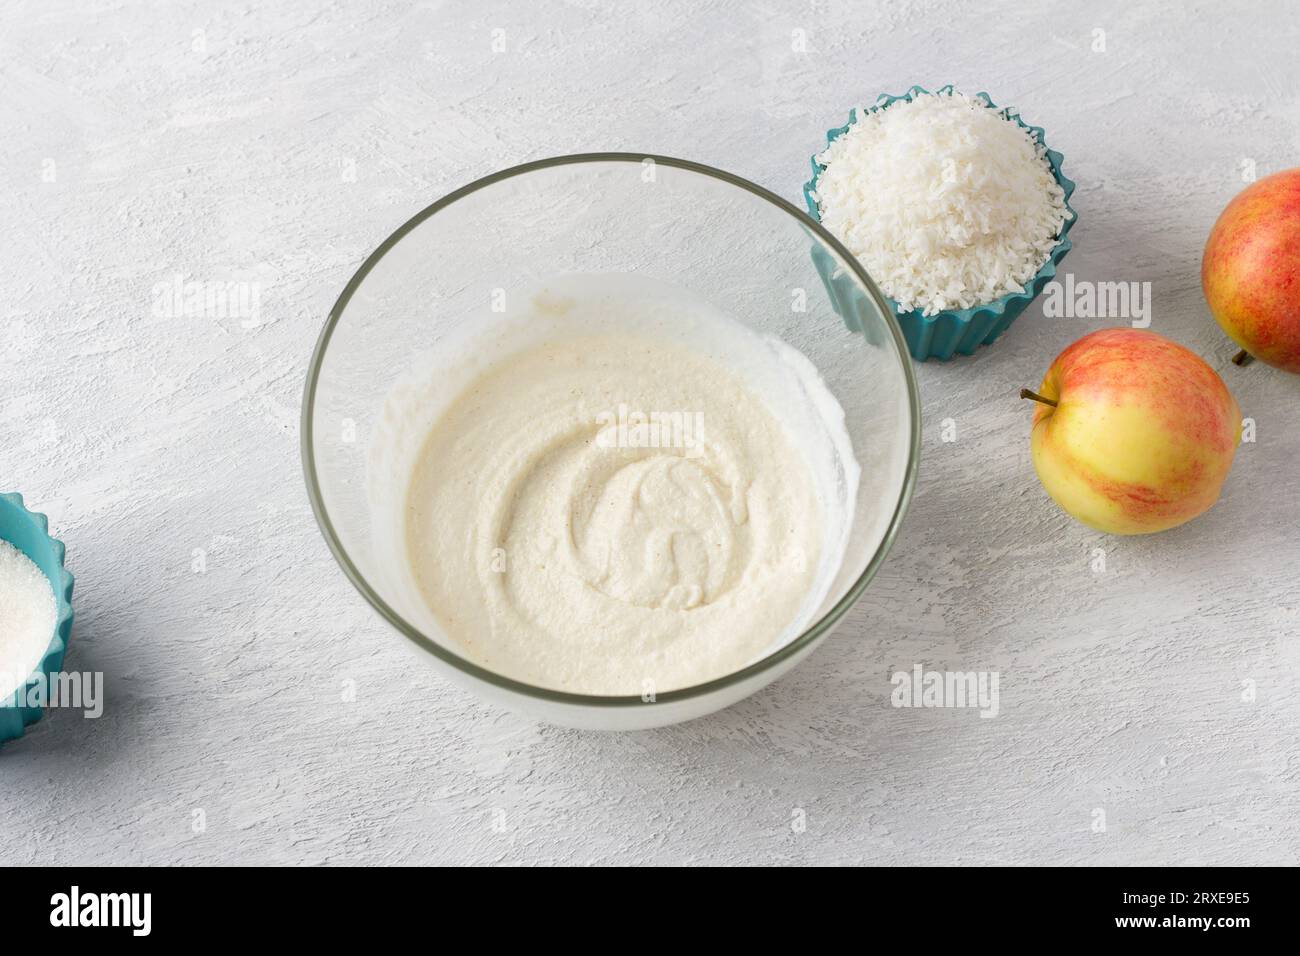 Cooking coconut semolina mannik with apples, do it yourself, step by step, step 1. Mix semolina with yogurt. Stock Photo